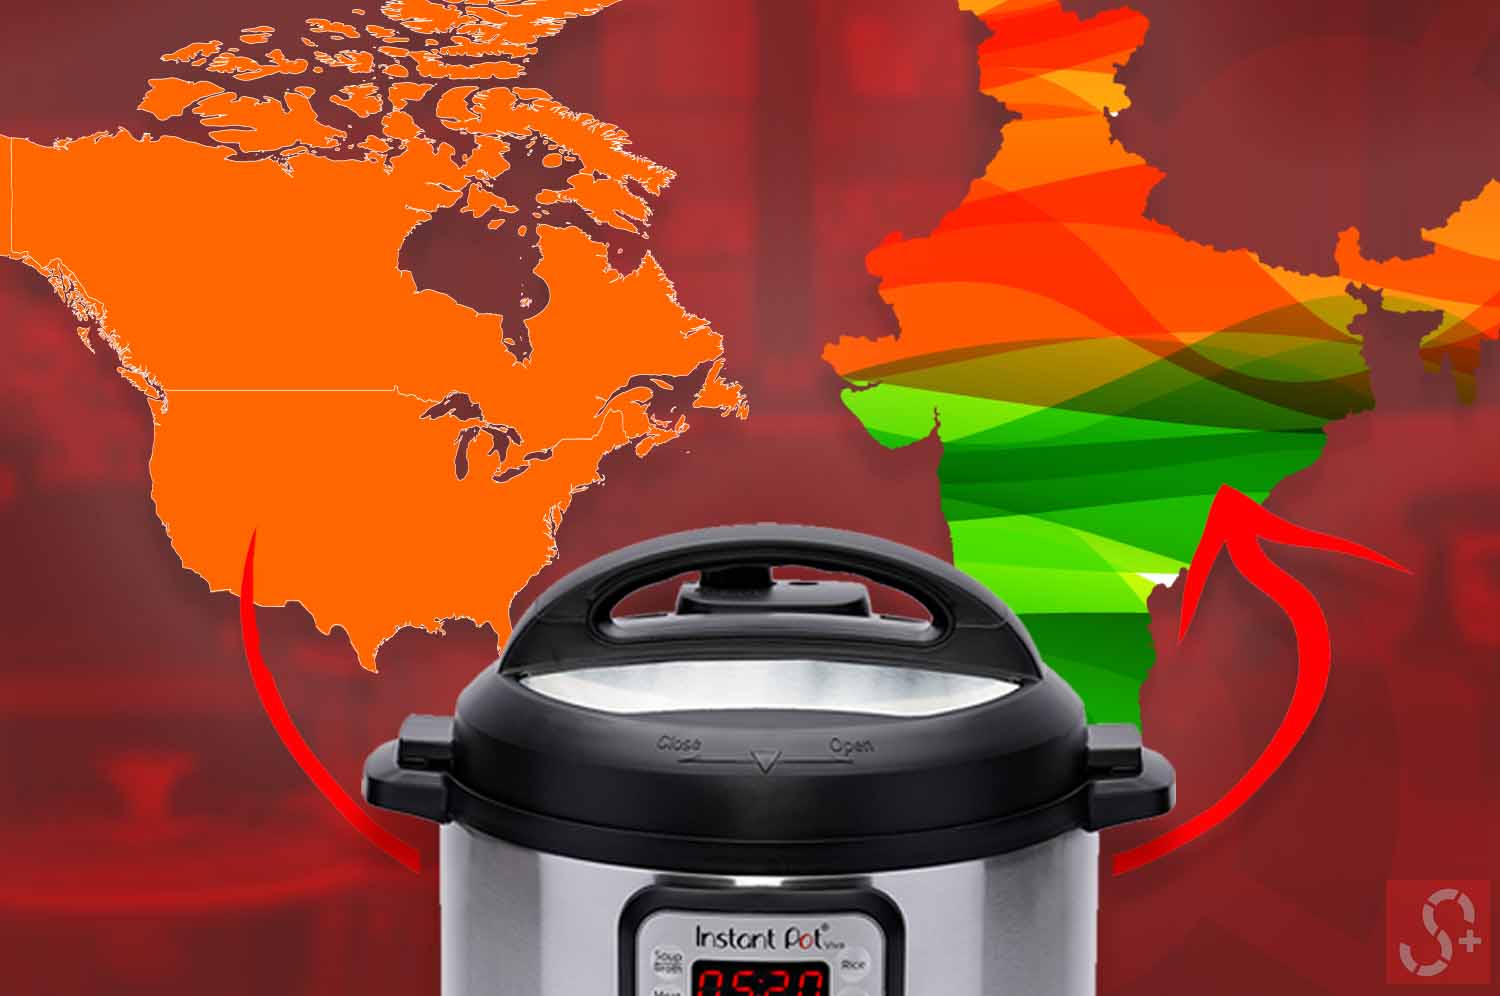 Instant Pot in front of map showing America to India